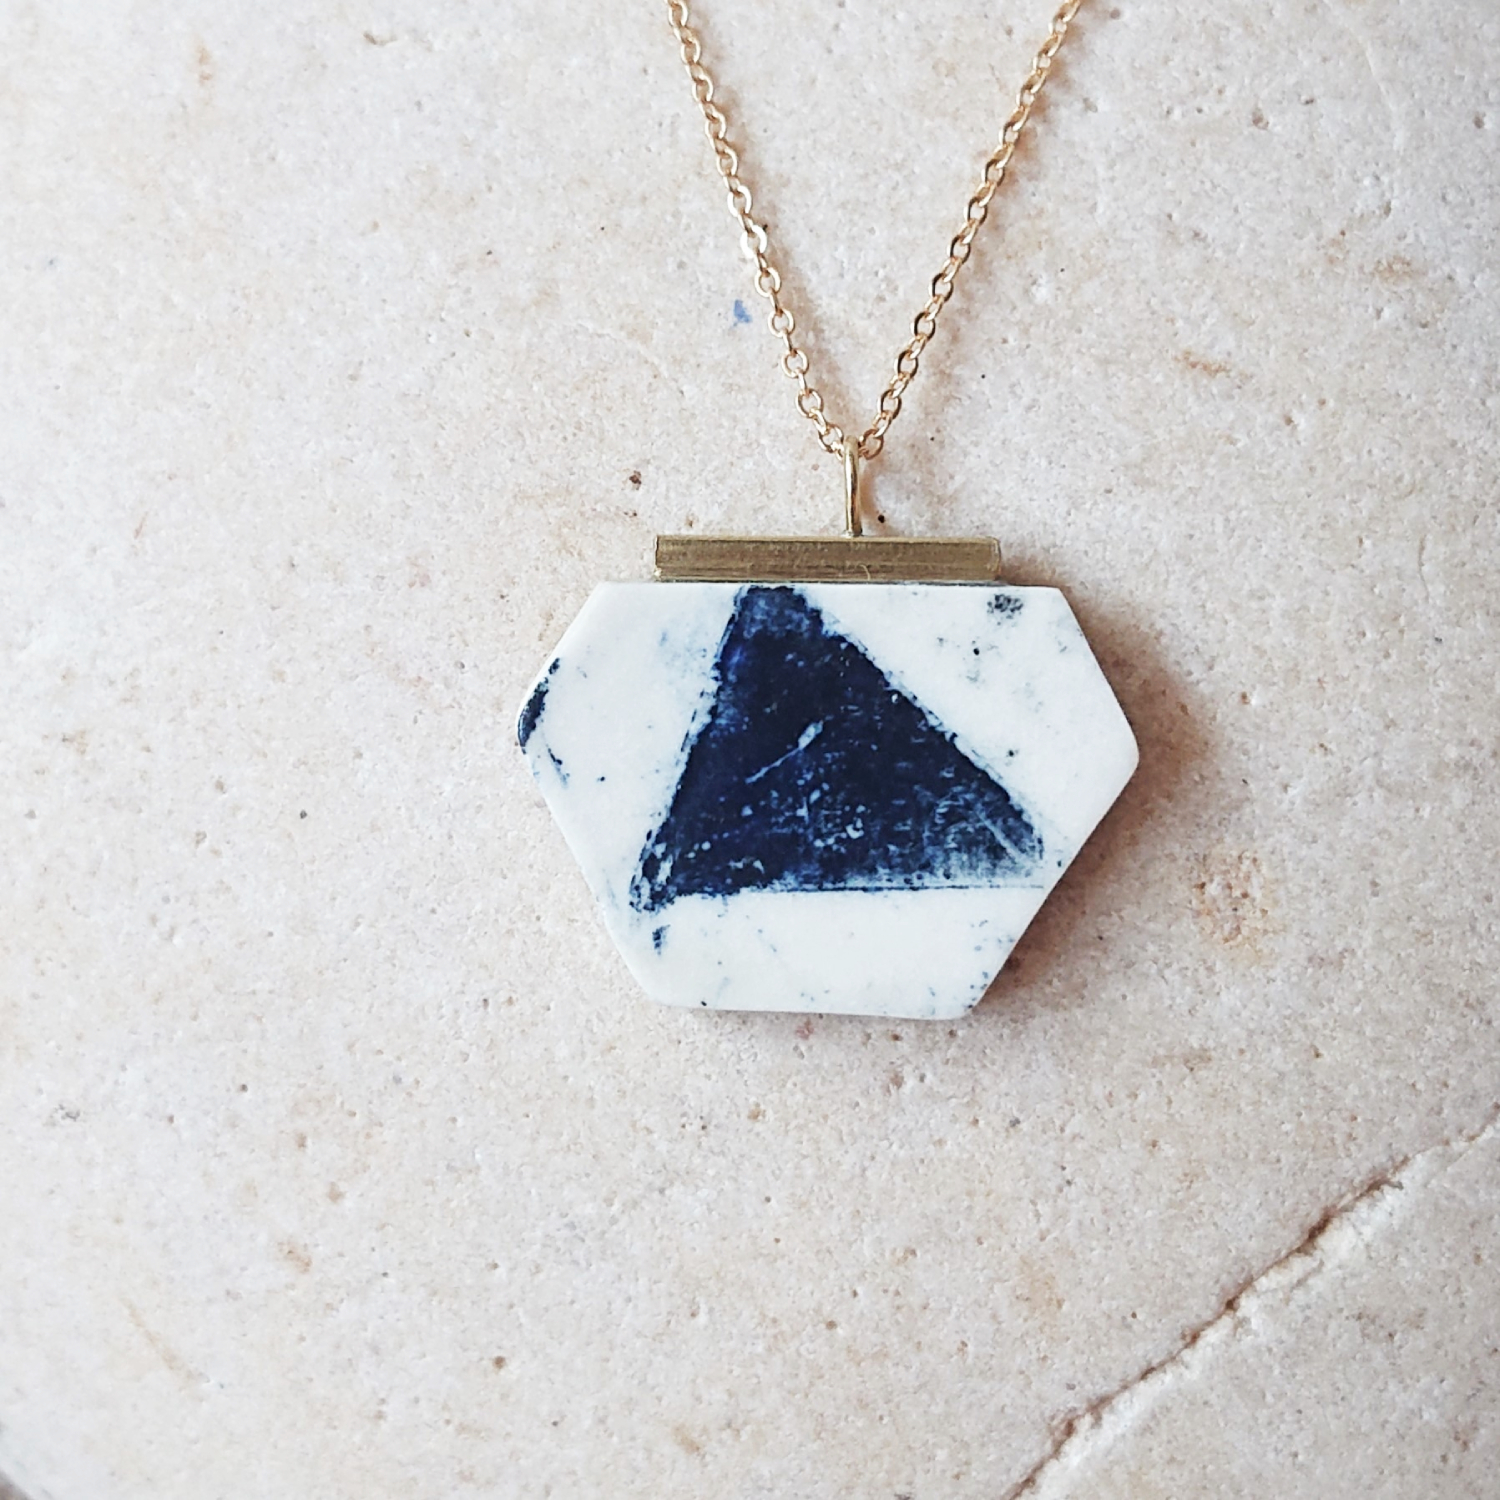 Porcelain and Brass necklace by Clay Shed Studio